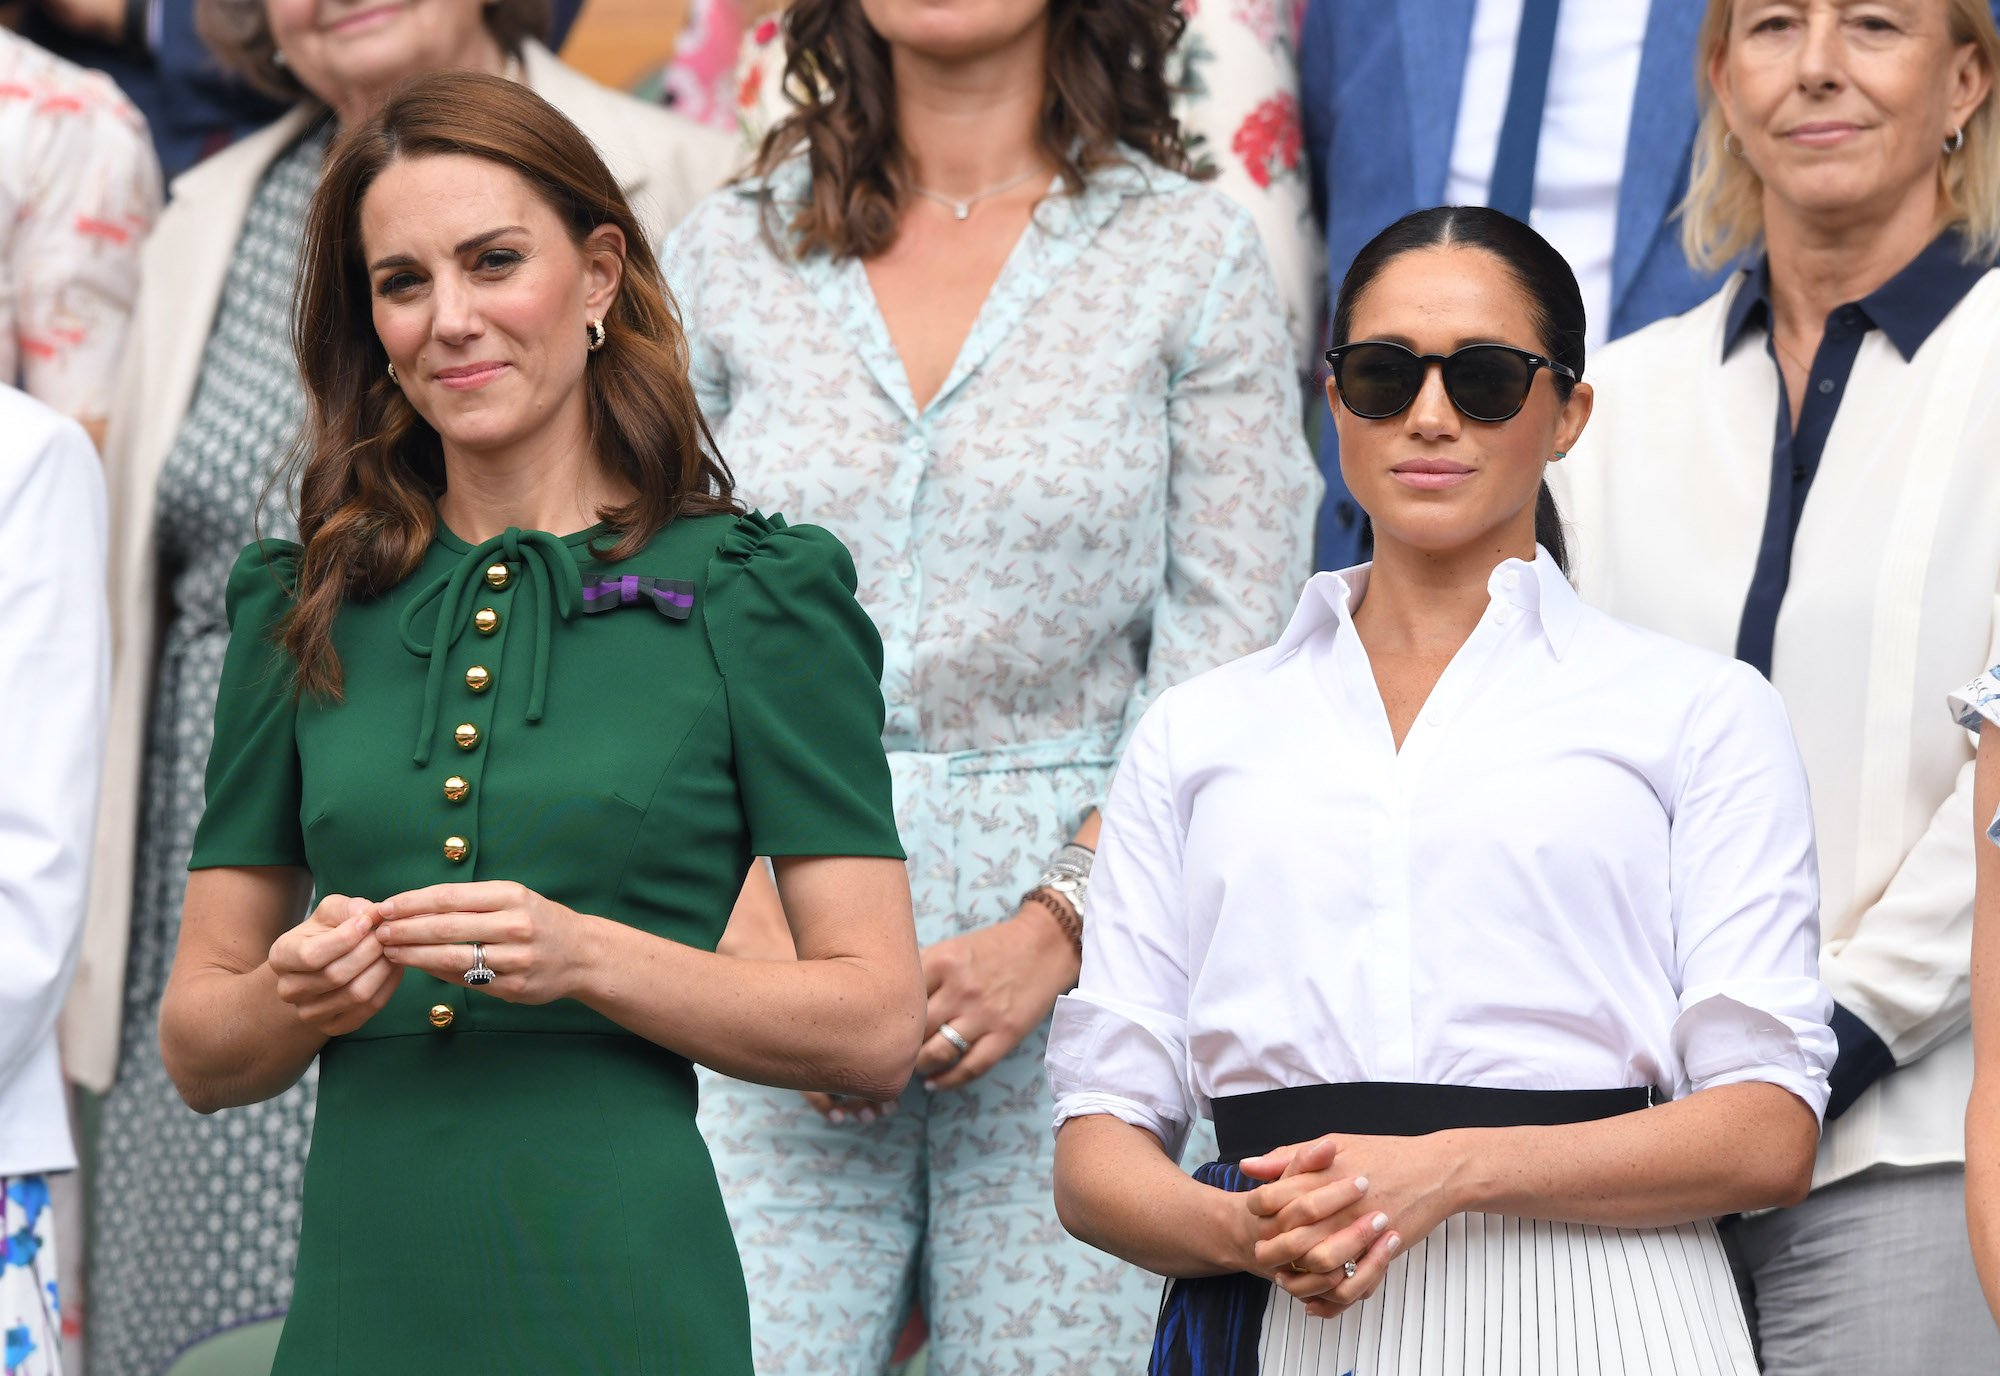 (L-R) Kate Middleton and Meghan Markle, standing in front of a crowd